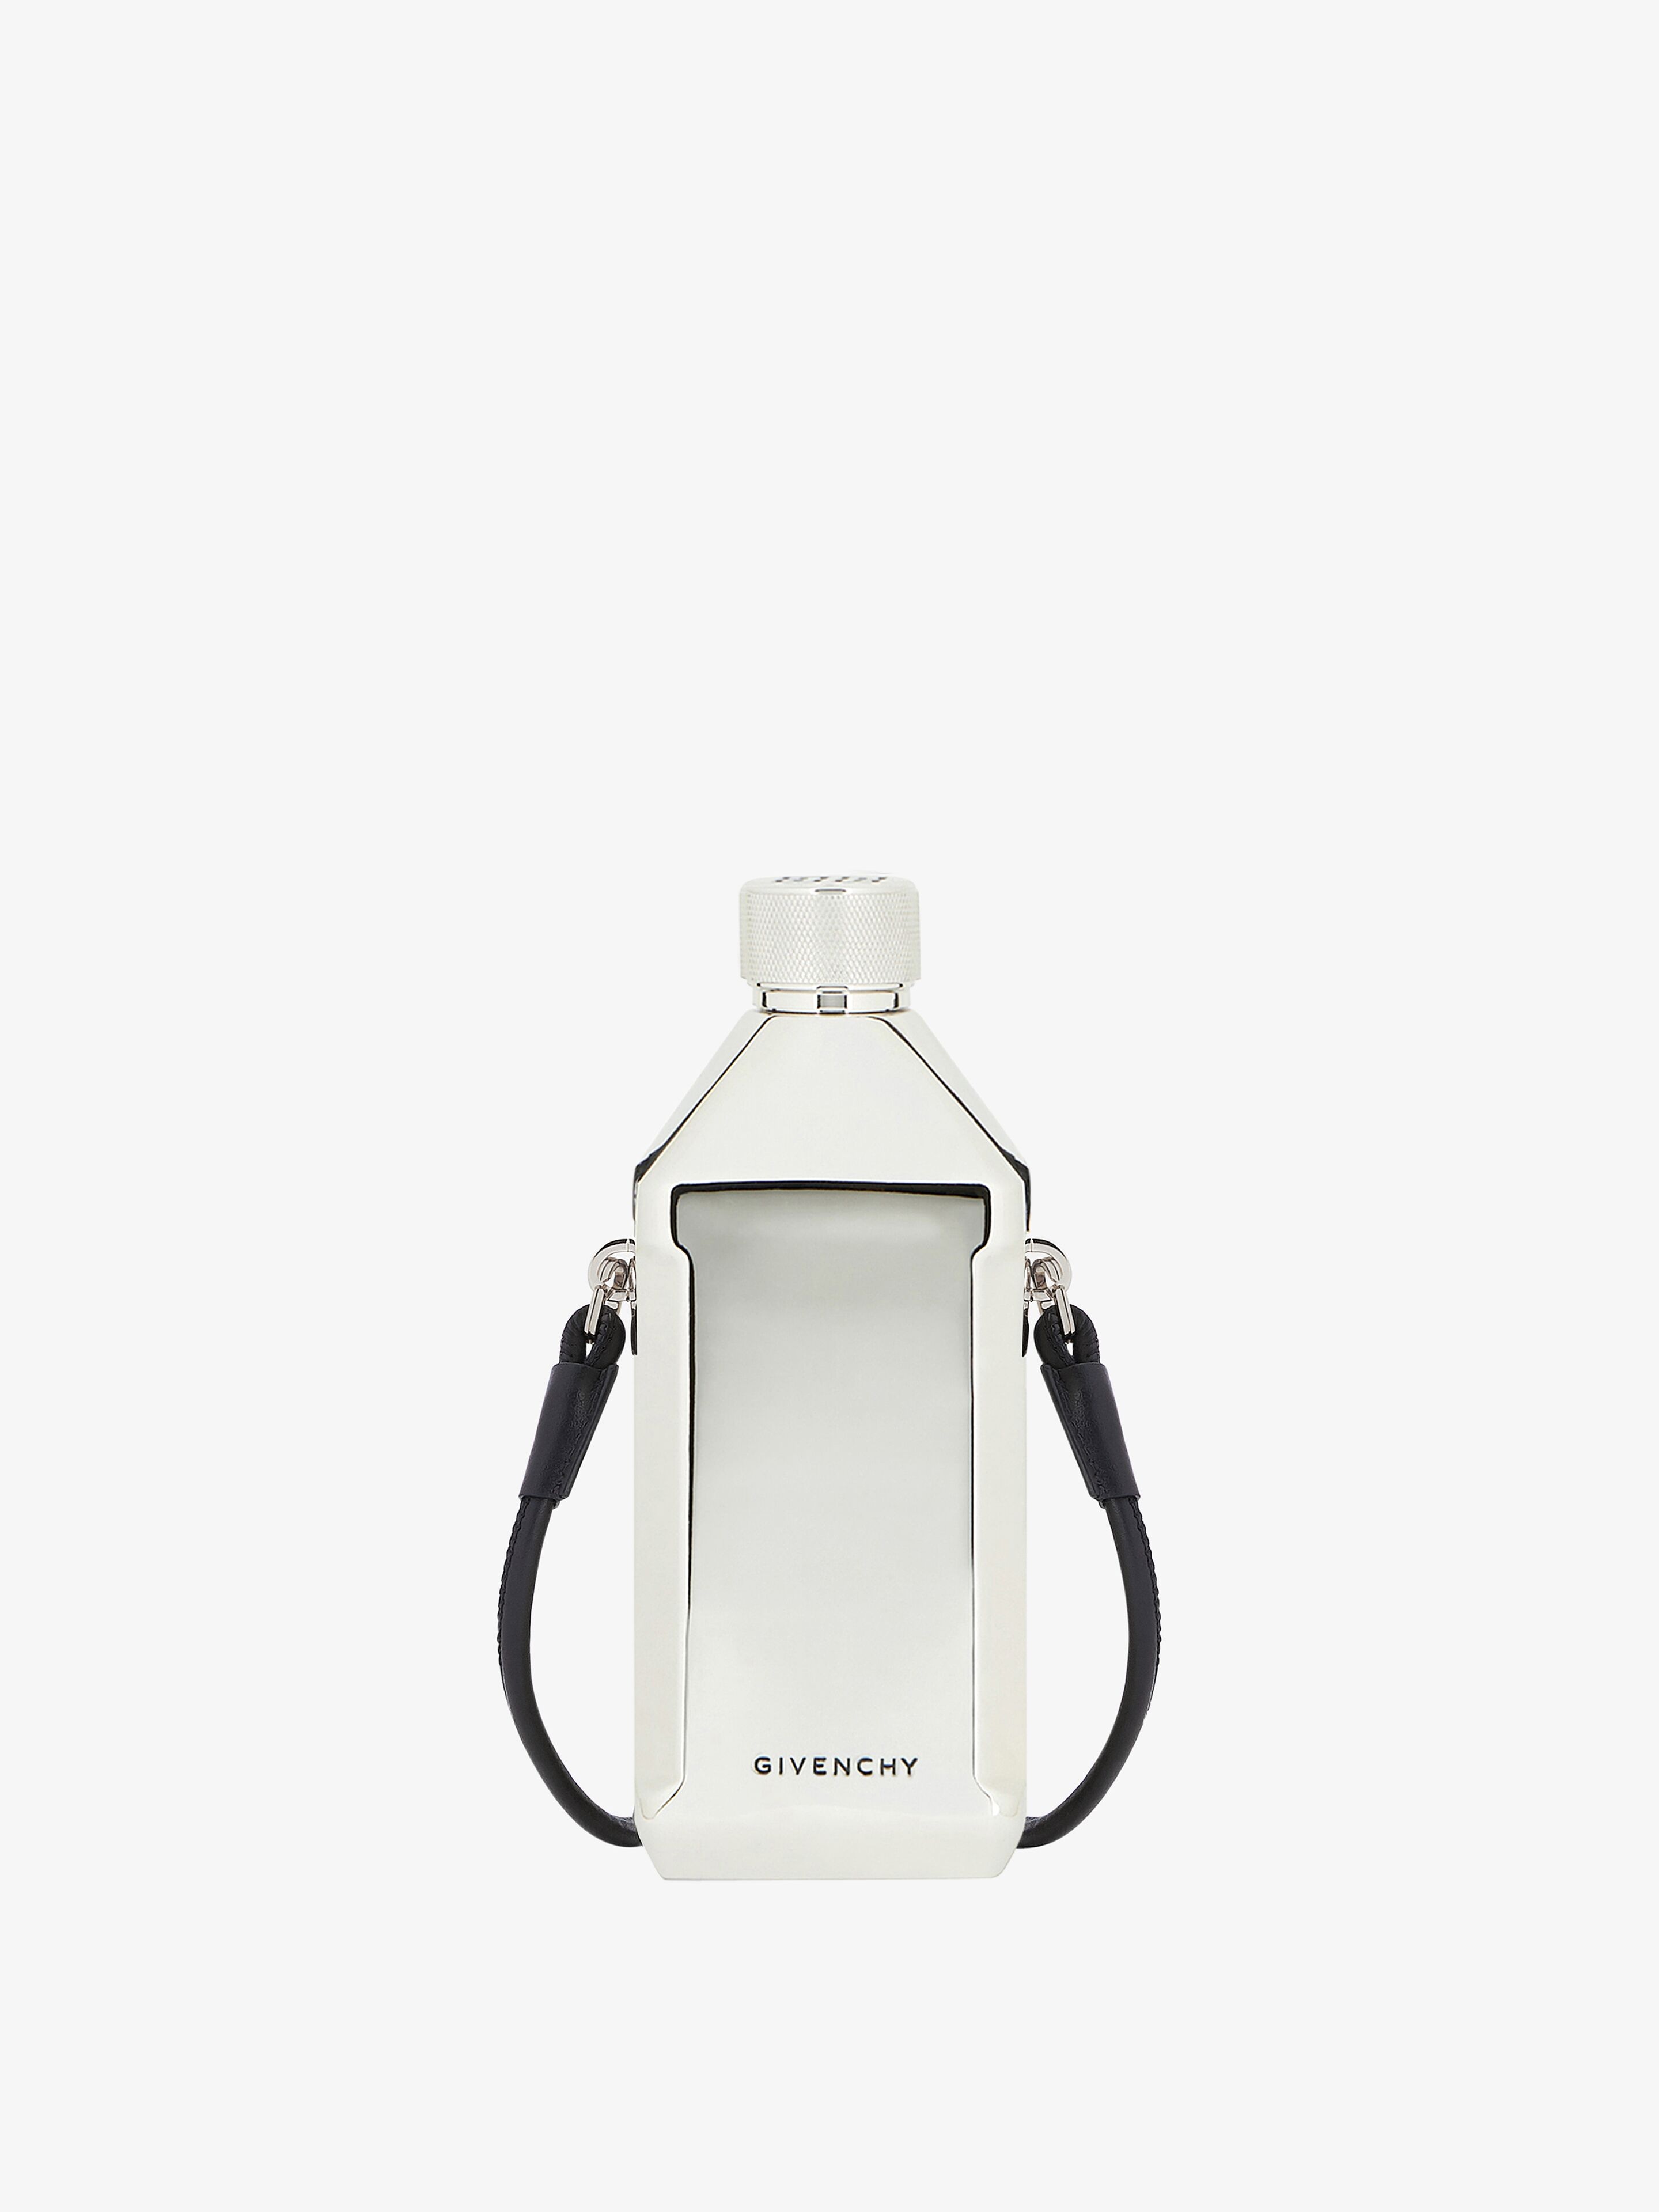 Givenchy official site - Men's collection